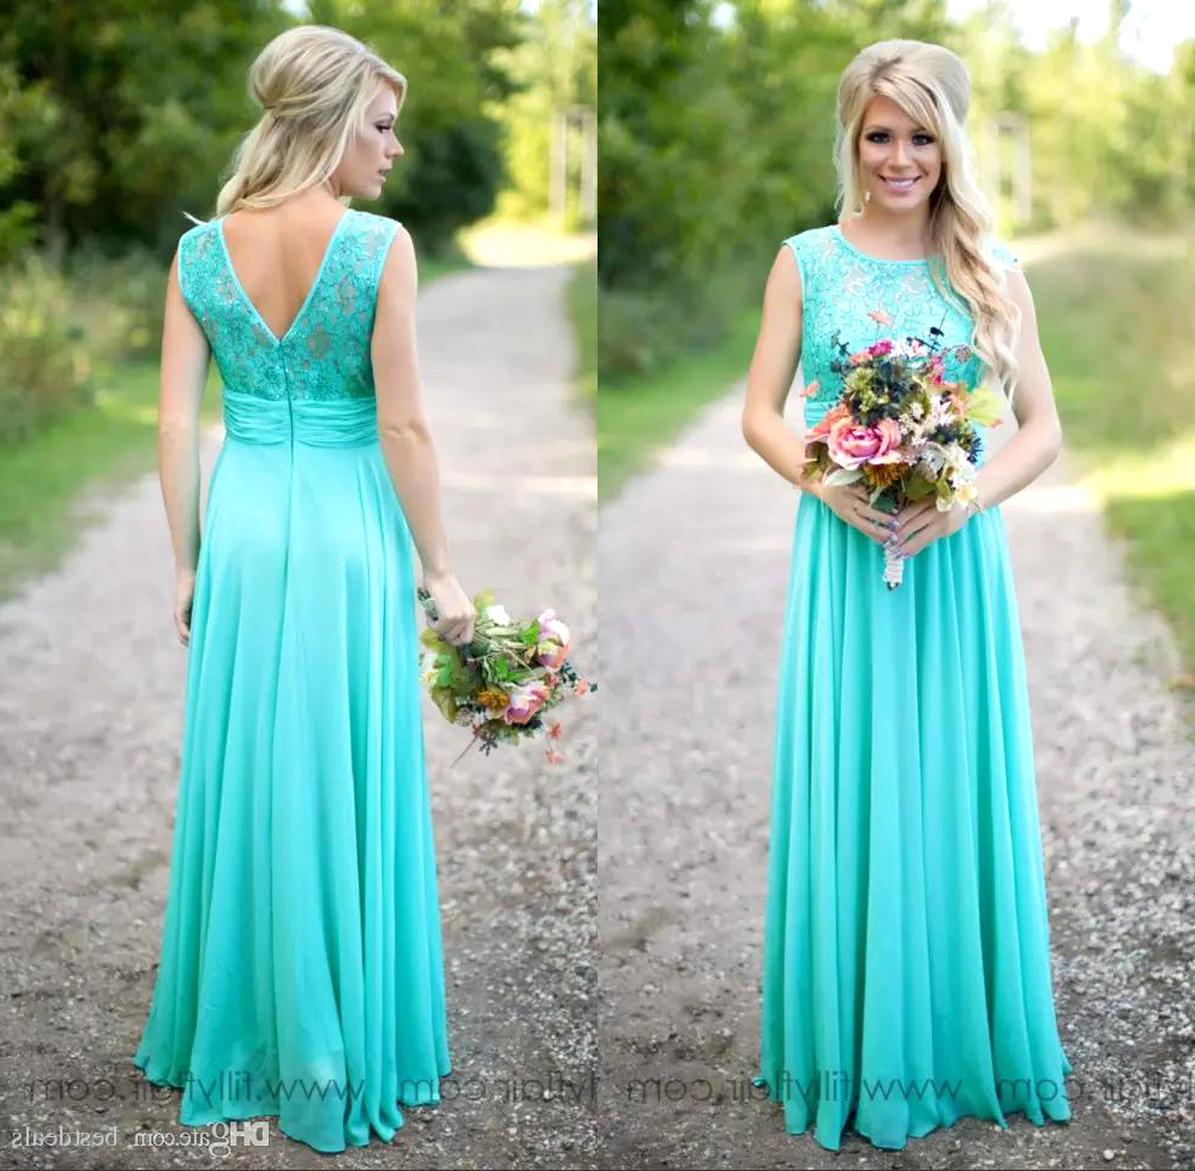 Turquoise Bridesmaid Dresses for sale in UK View 51 ads